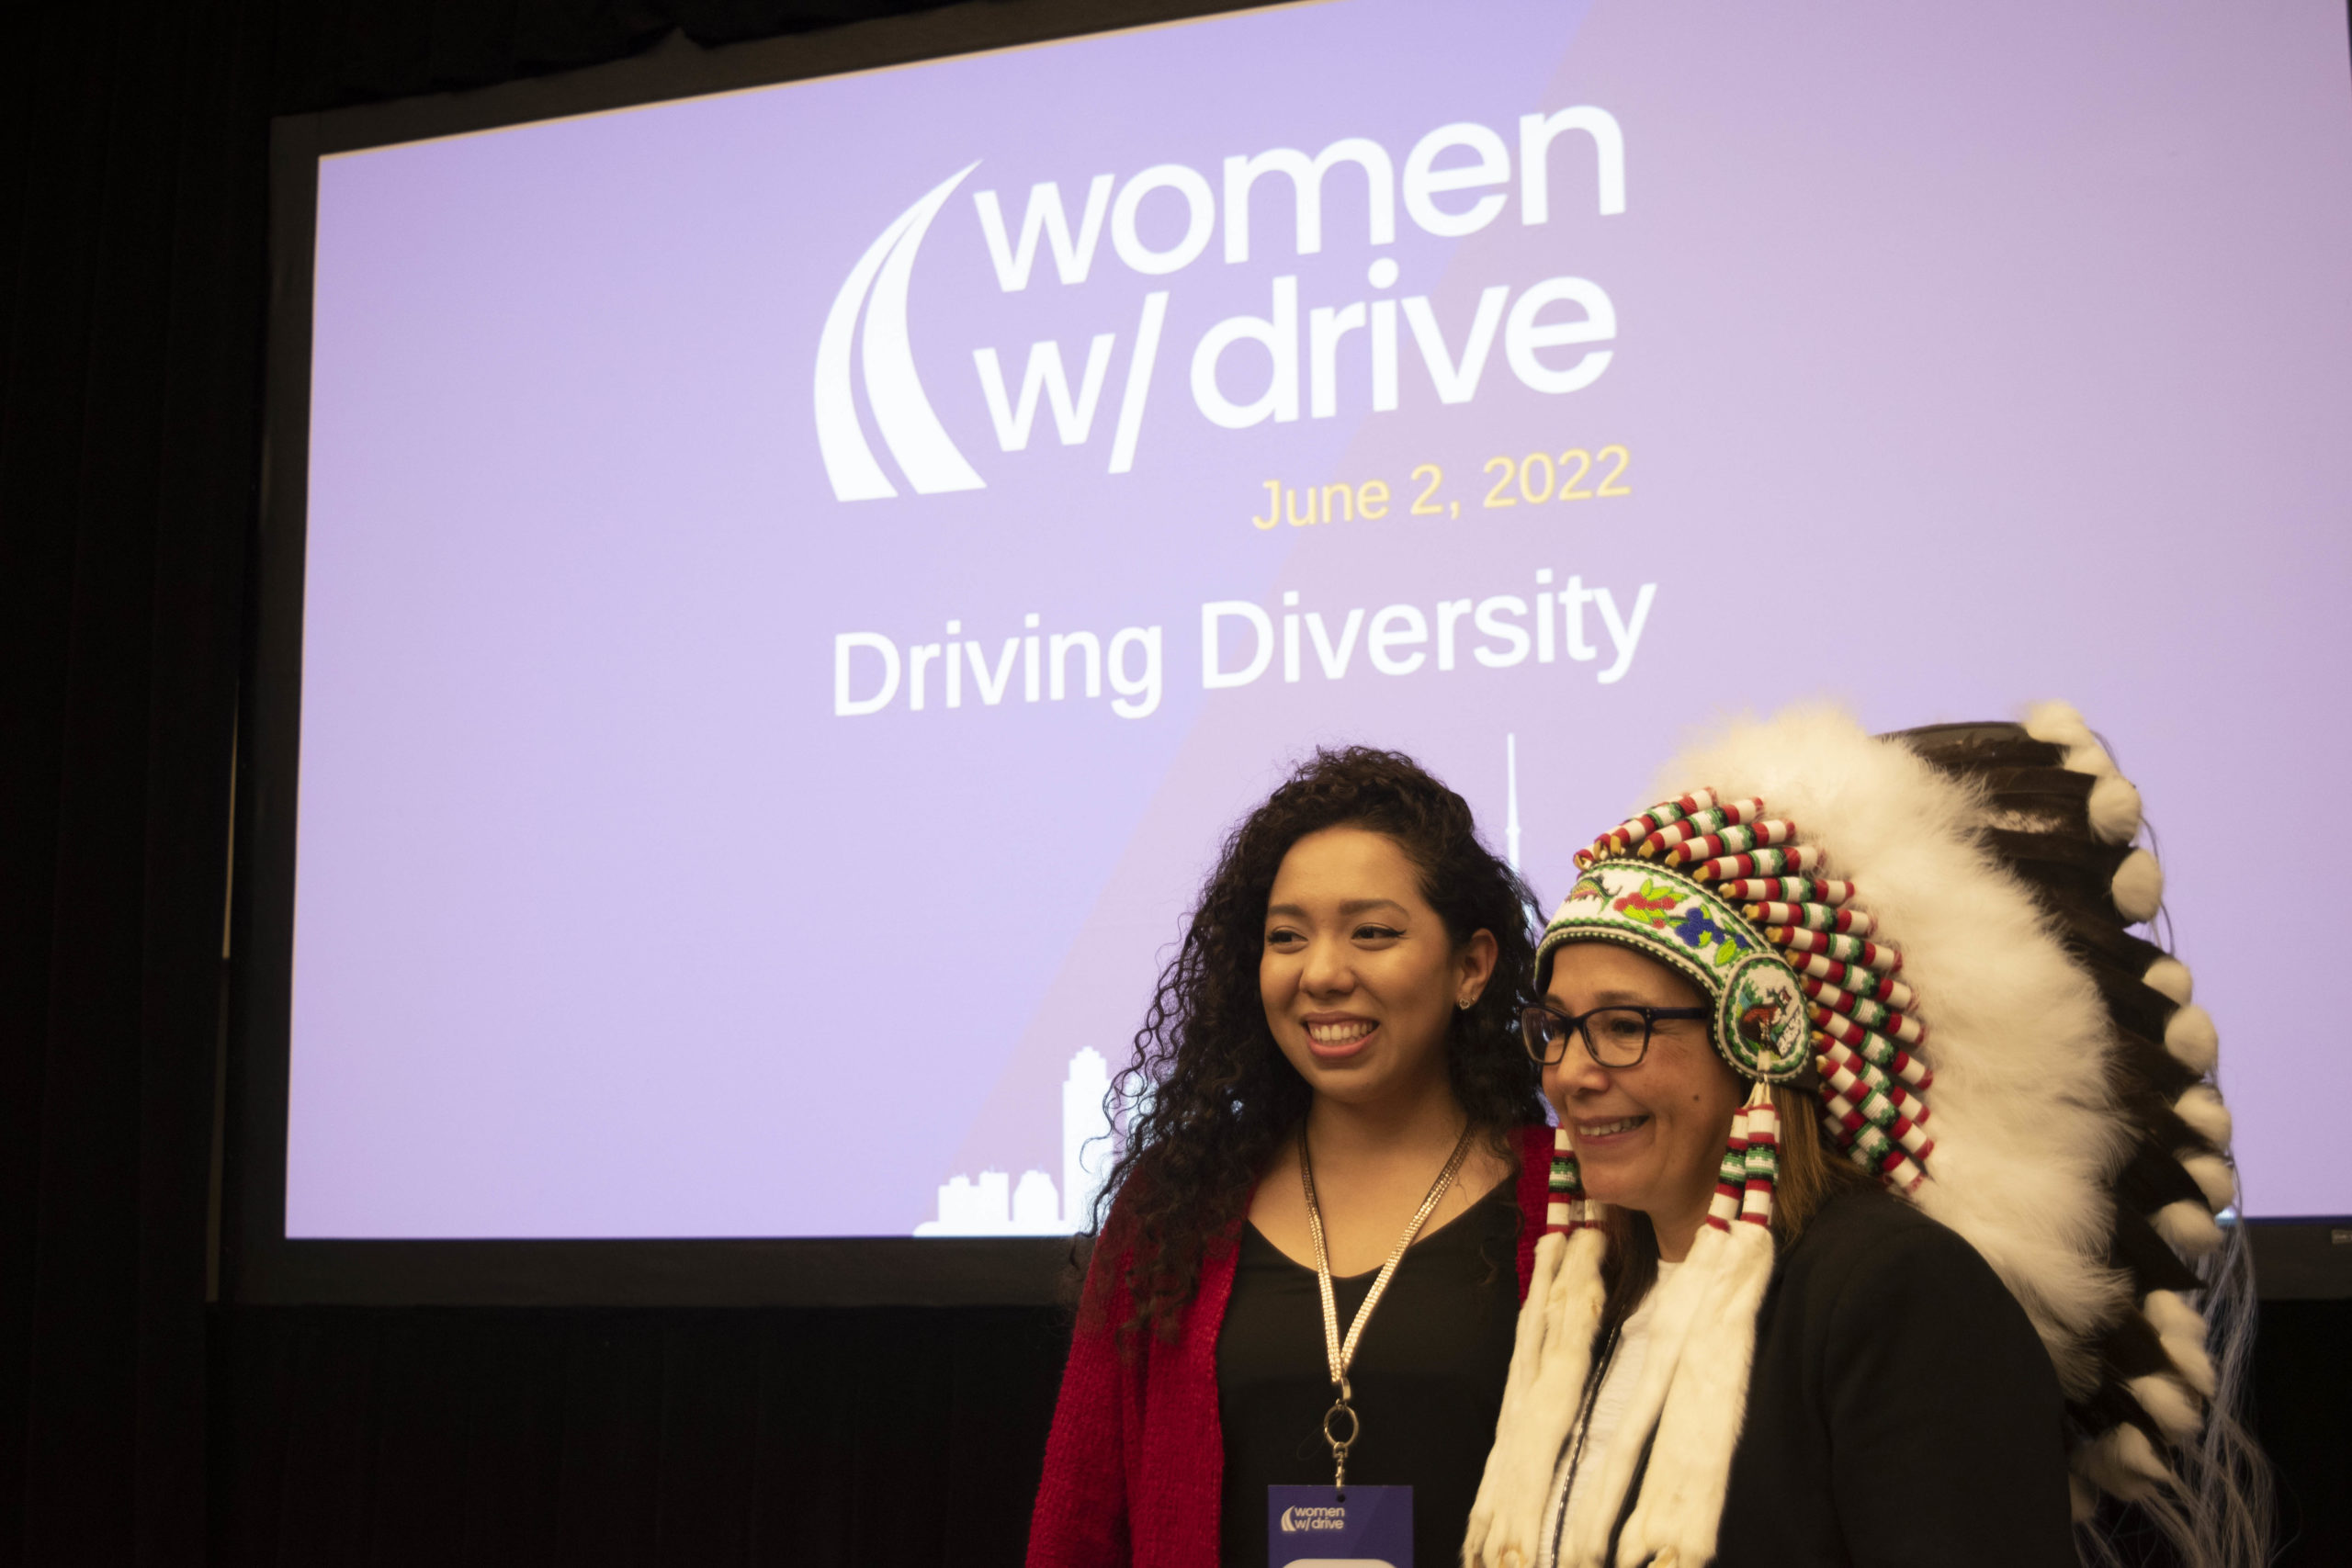 Driving Diversity for Women in the Workplace